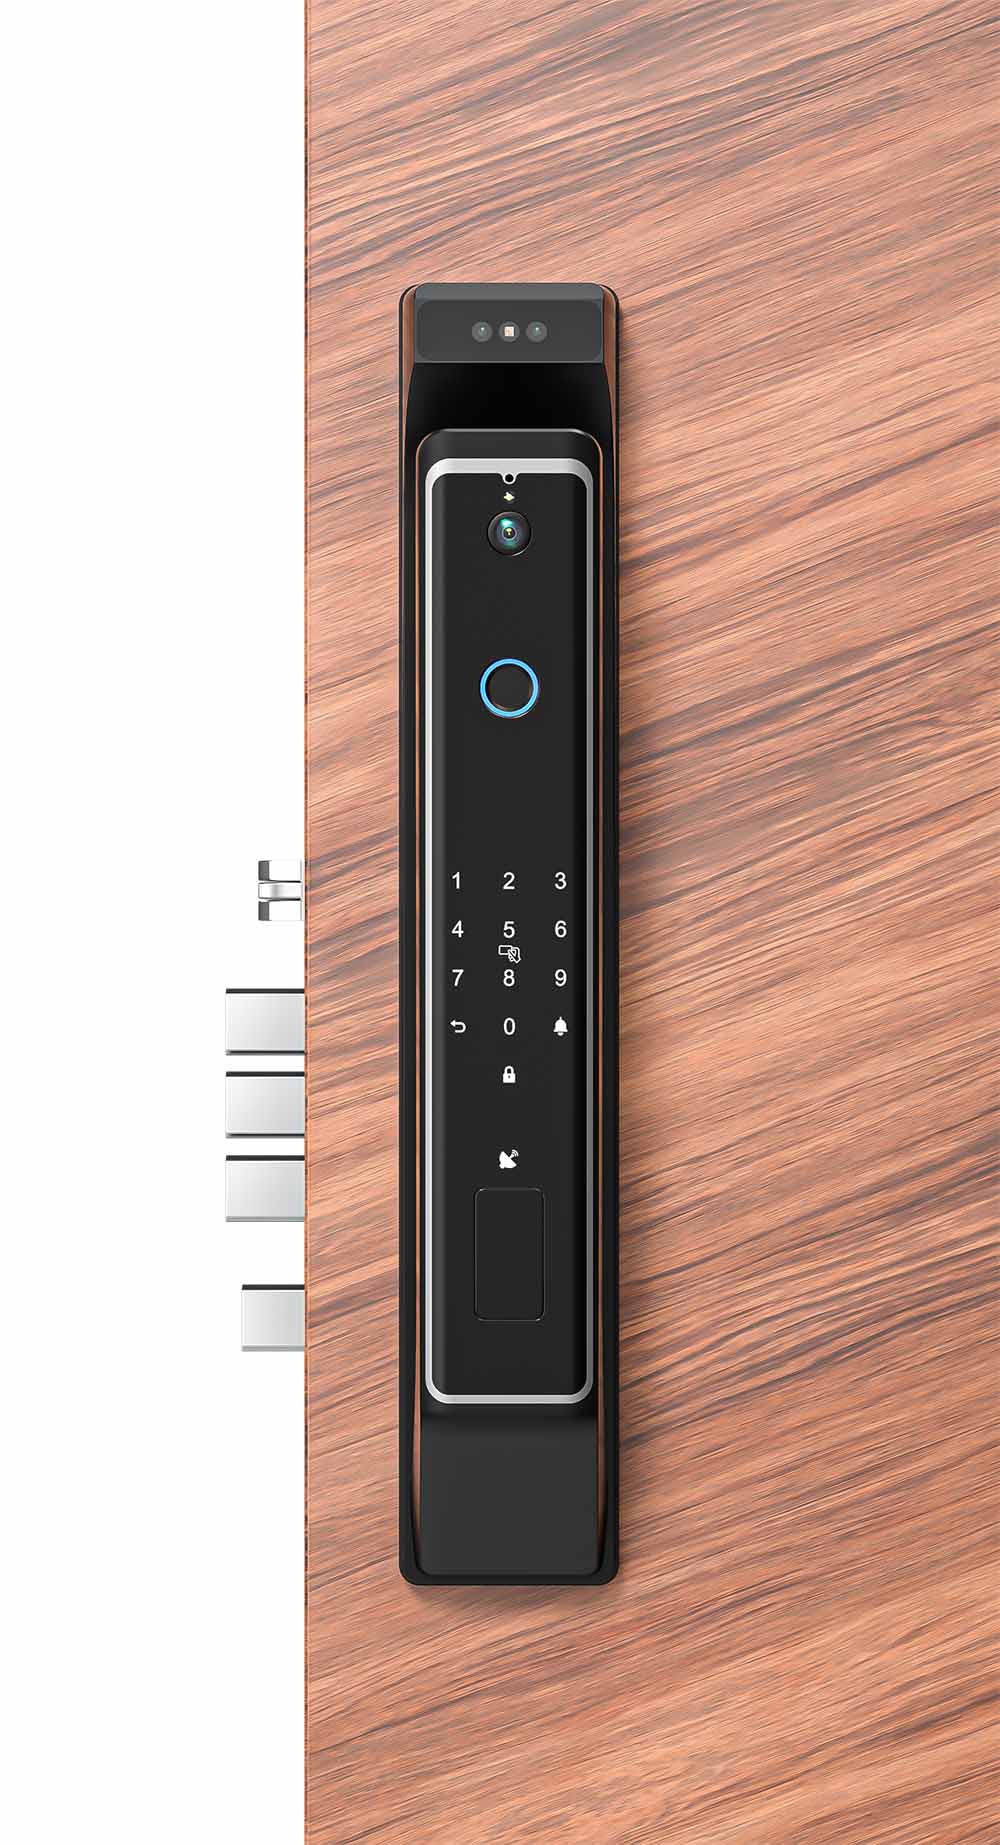 3D Face Recognition Automatic Bluetooth Lock YFBR-K9